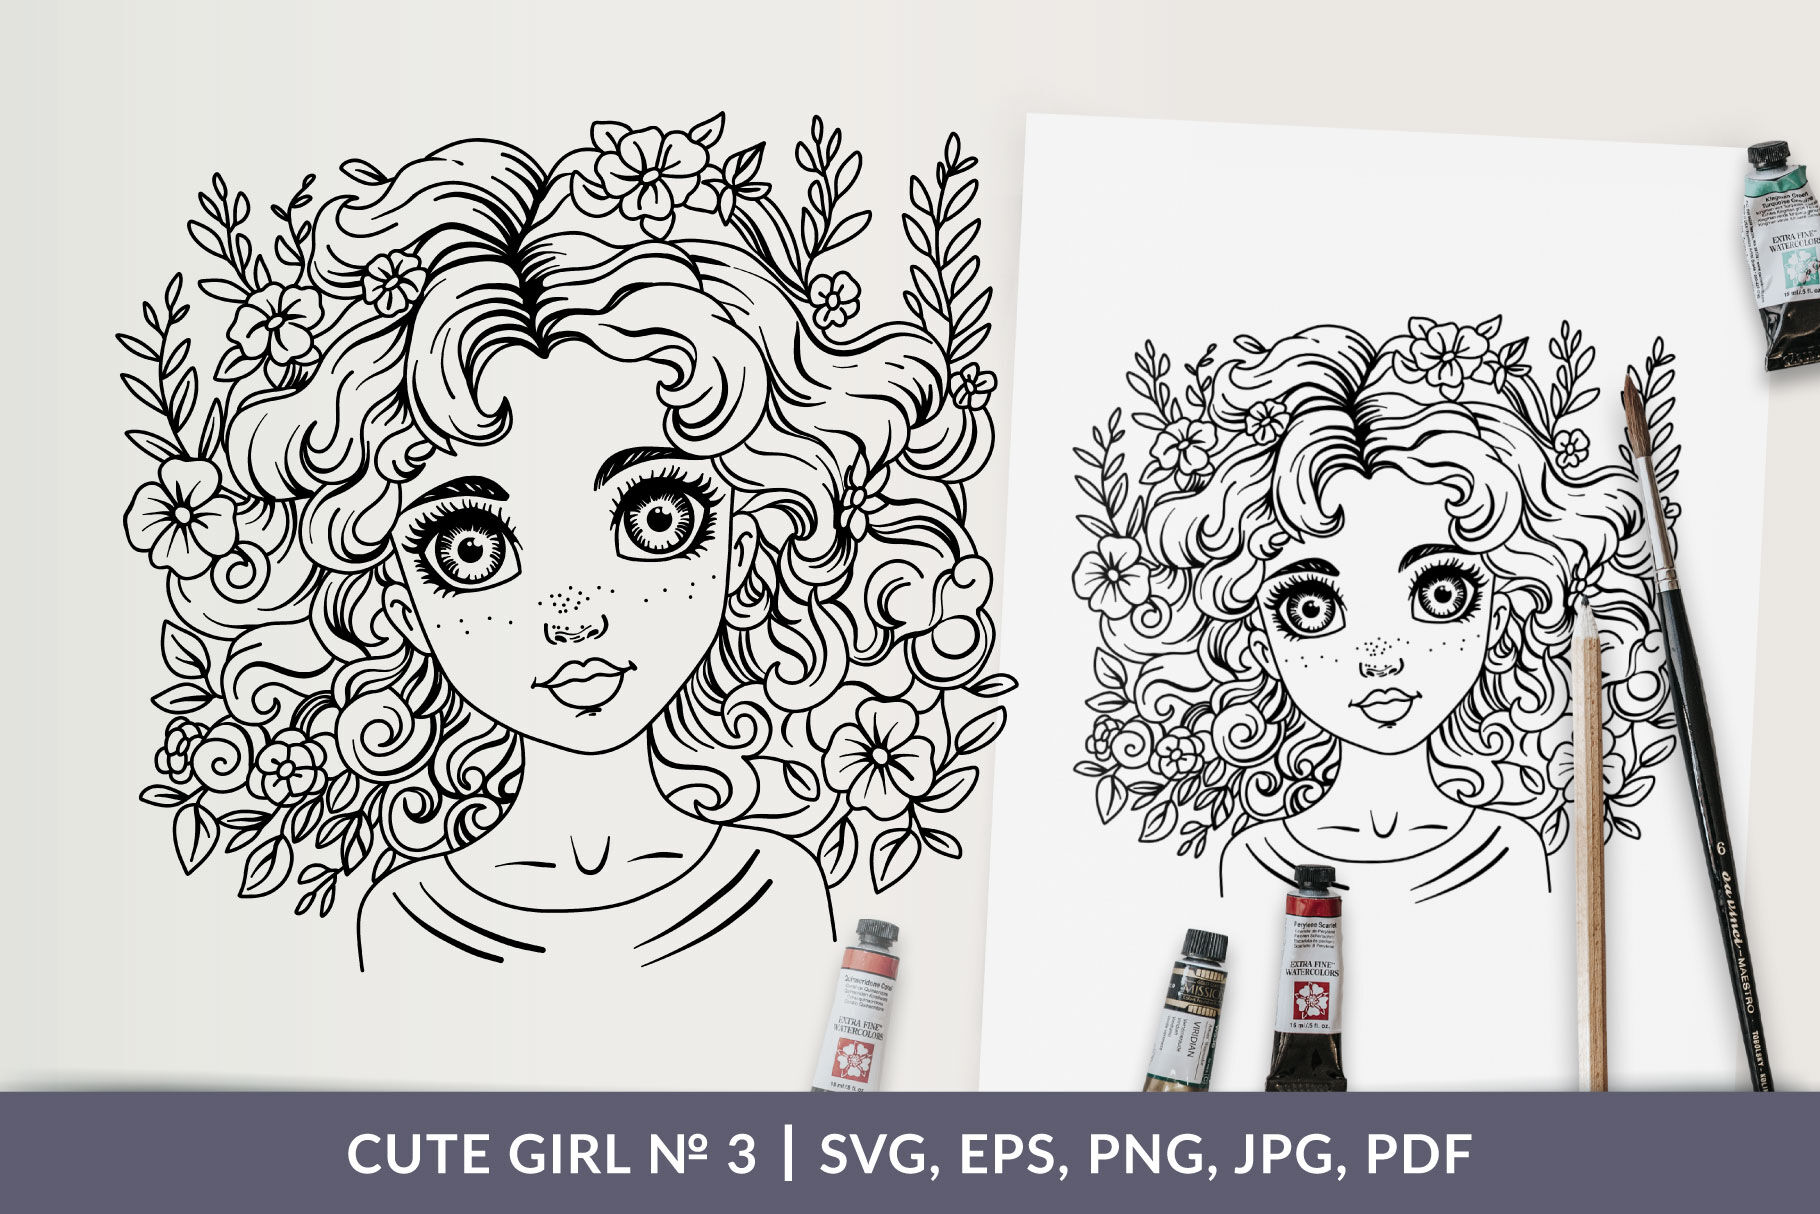 Cute Girl Coloring Pages #3 By Sevrina Art